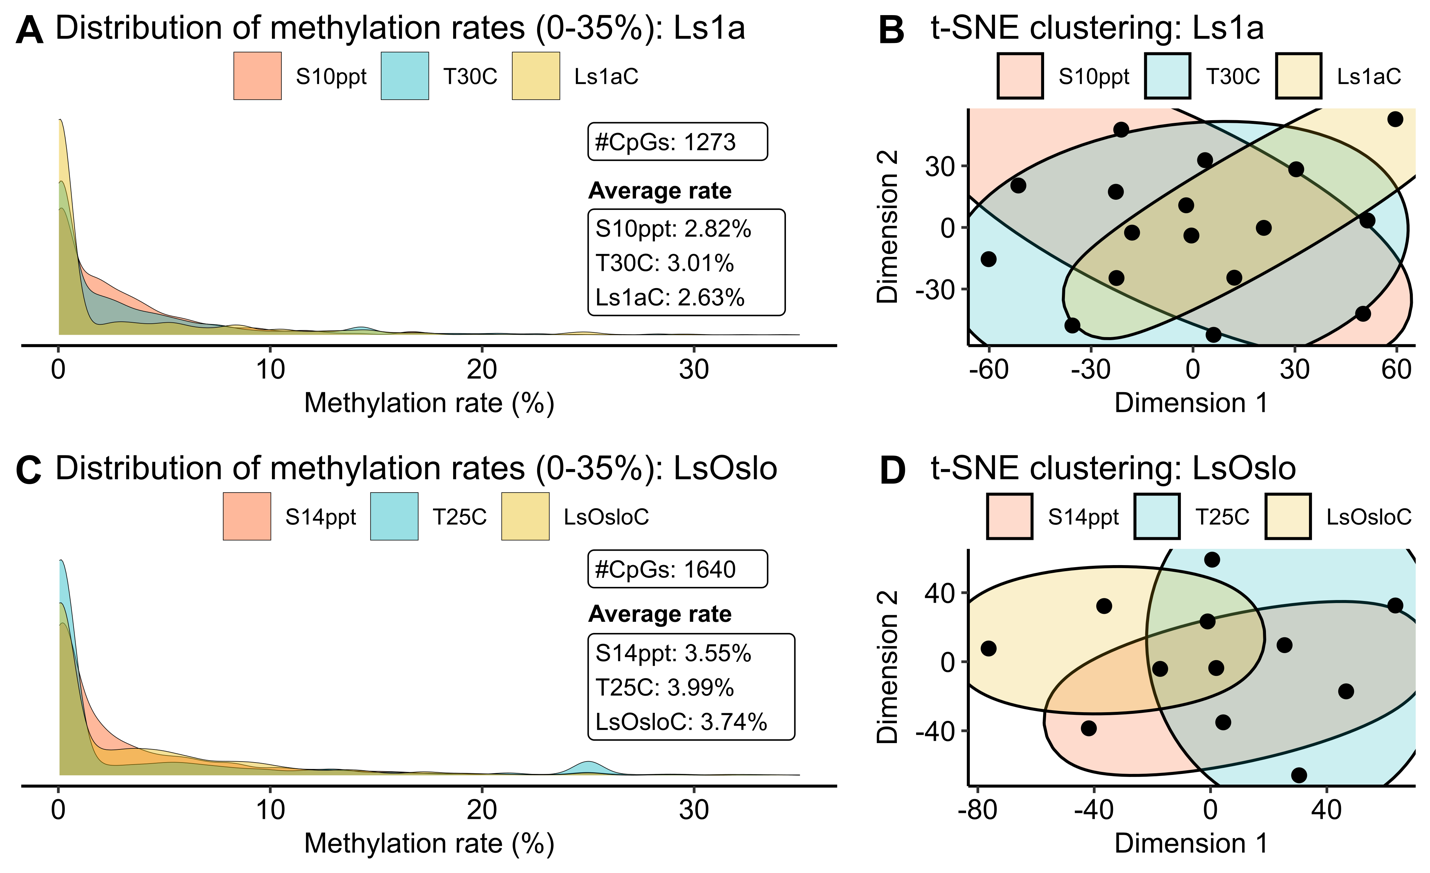 Figure 25 panels A and C show that the methylation response varies between treatments and controls in both LsOslo and Ls1a. Figures B and D show that there is a large degree of overlap in the methylation patterns in treatments and controls in both LsOslo and Ls1a.